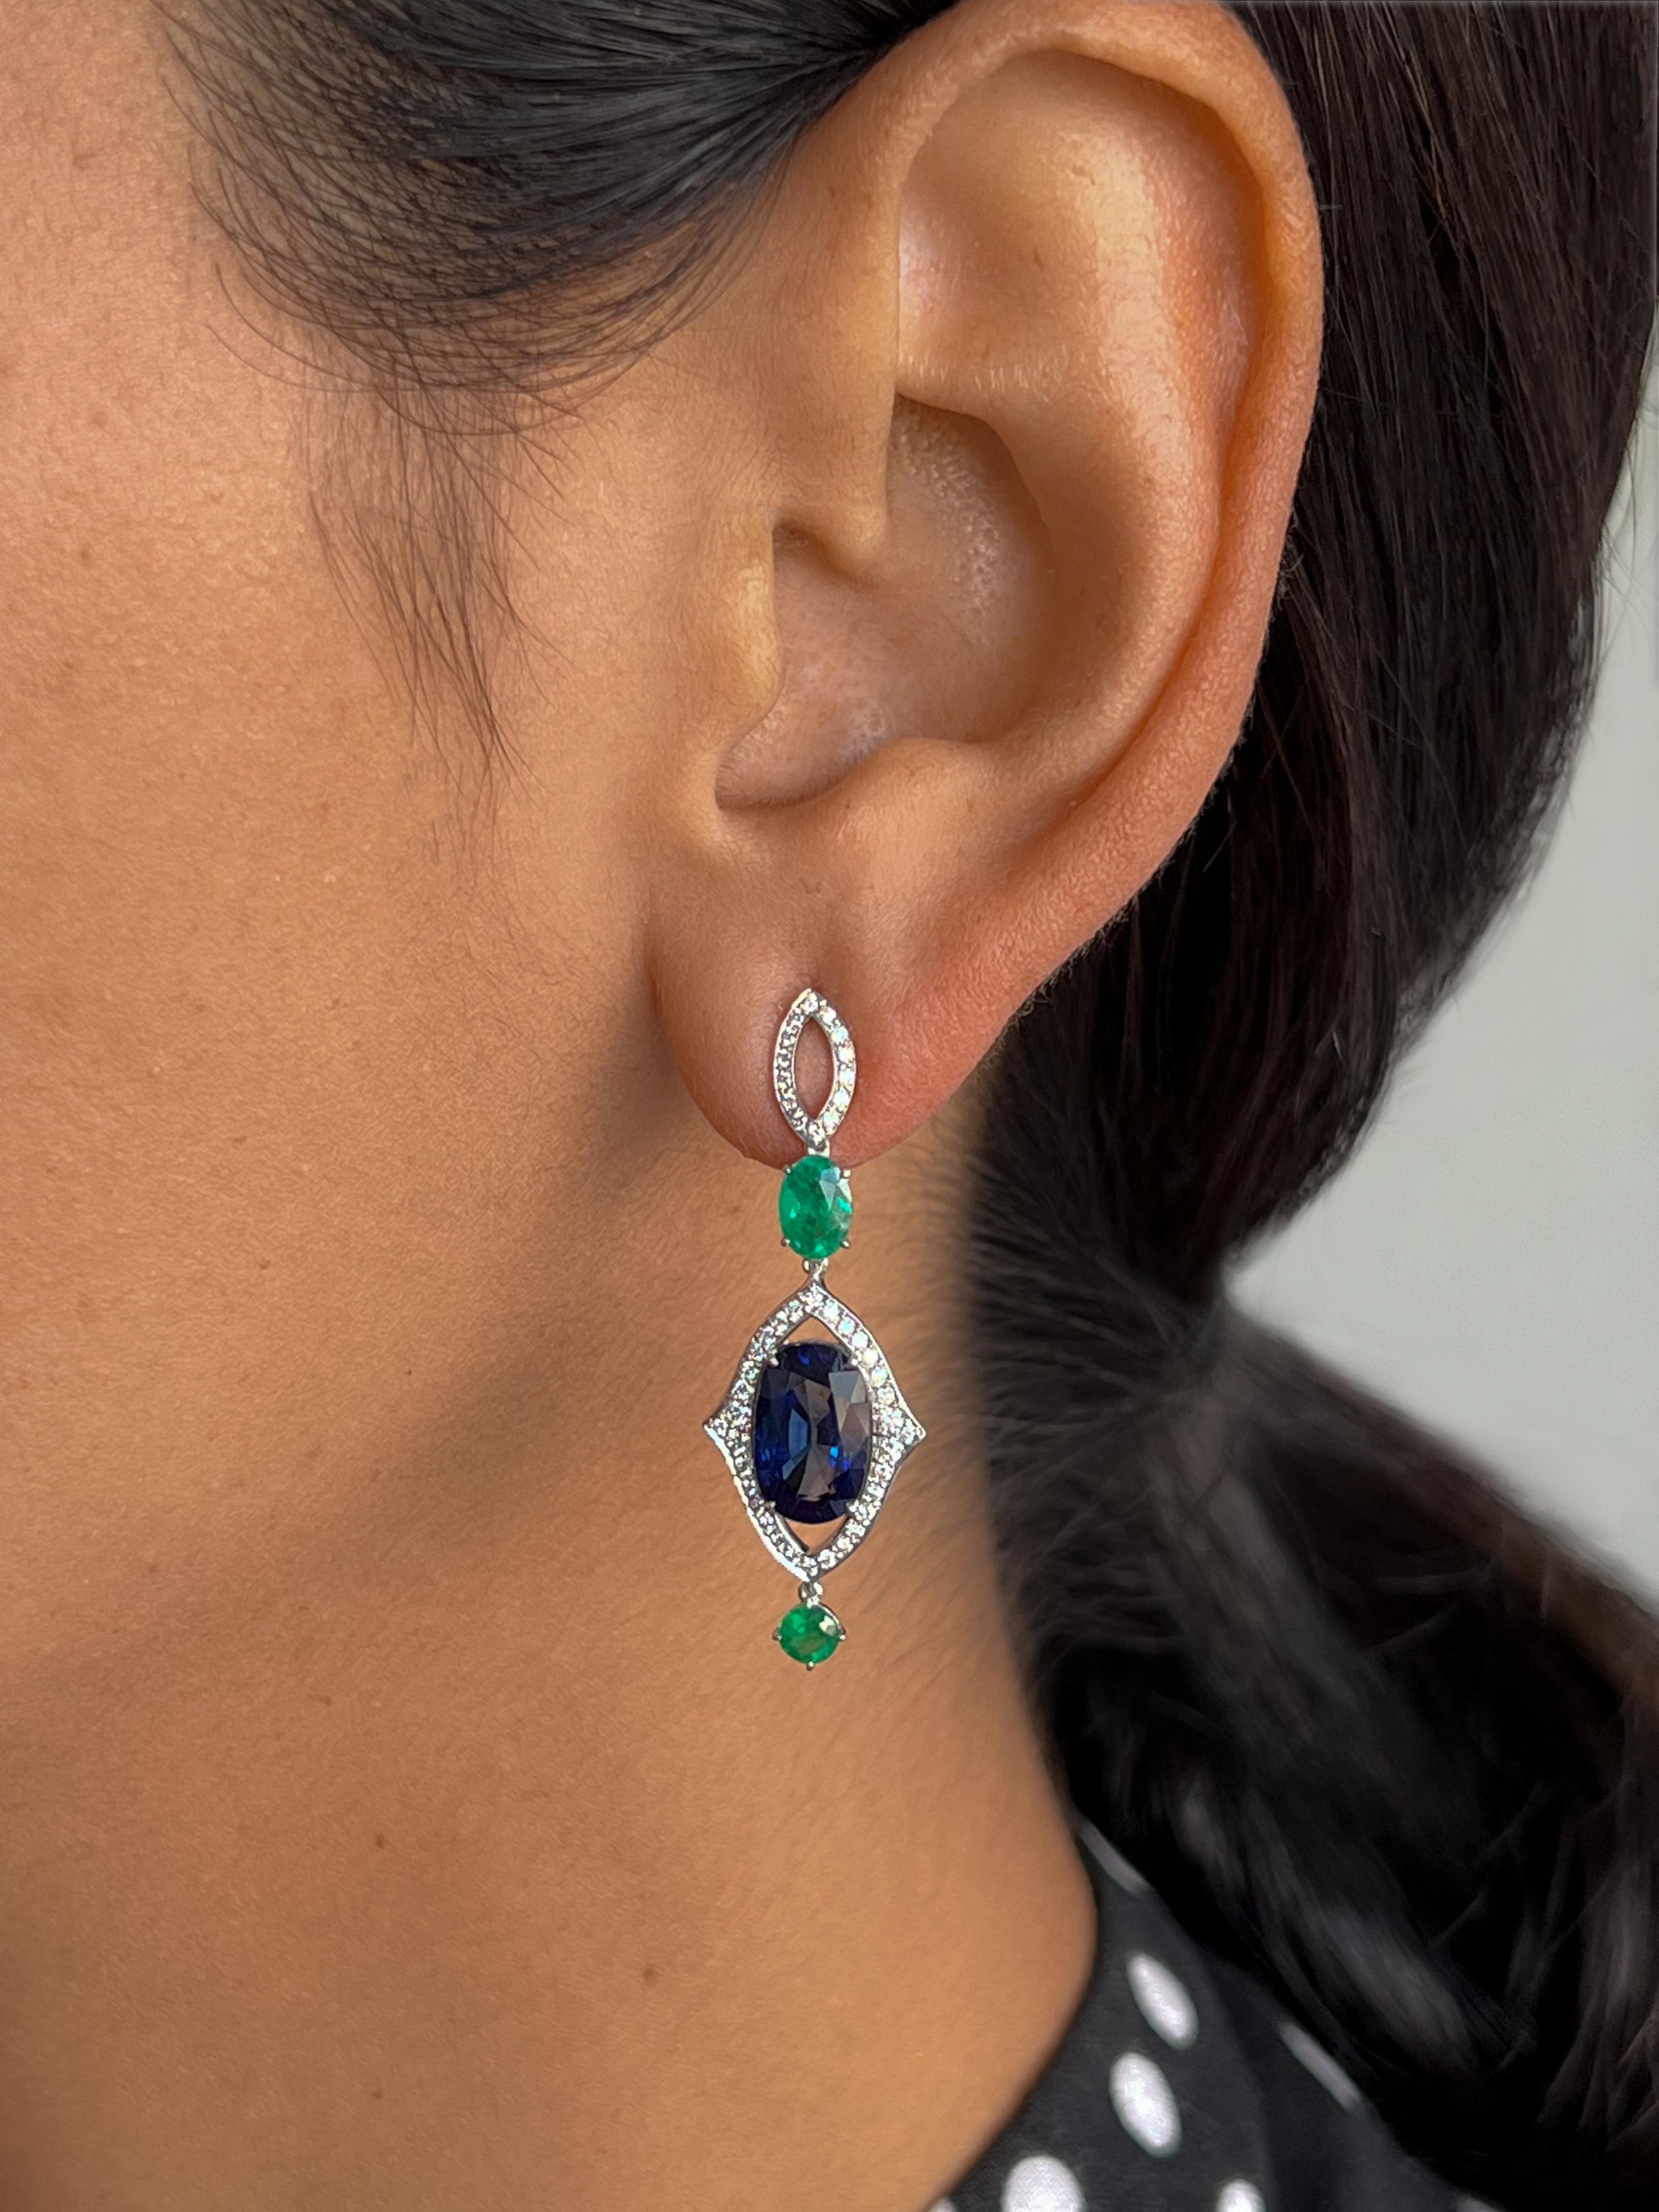 Oval Cut 5.61 Carat Blue Sapphire and 1.20 Carat Emerald Earrings in 18K White Gold For Sale